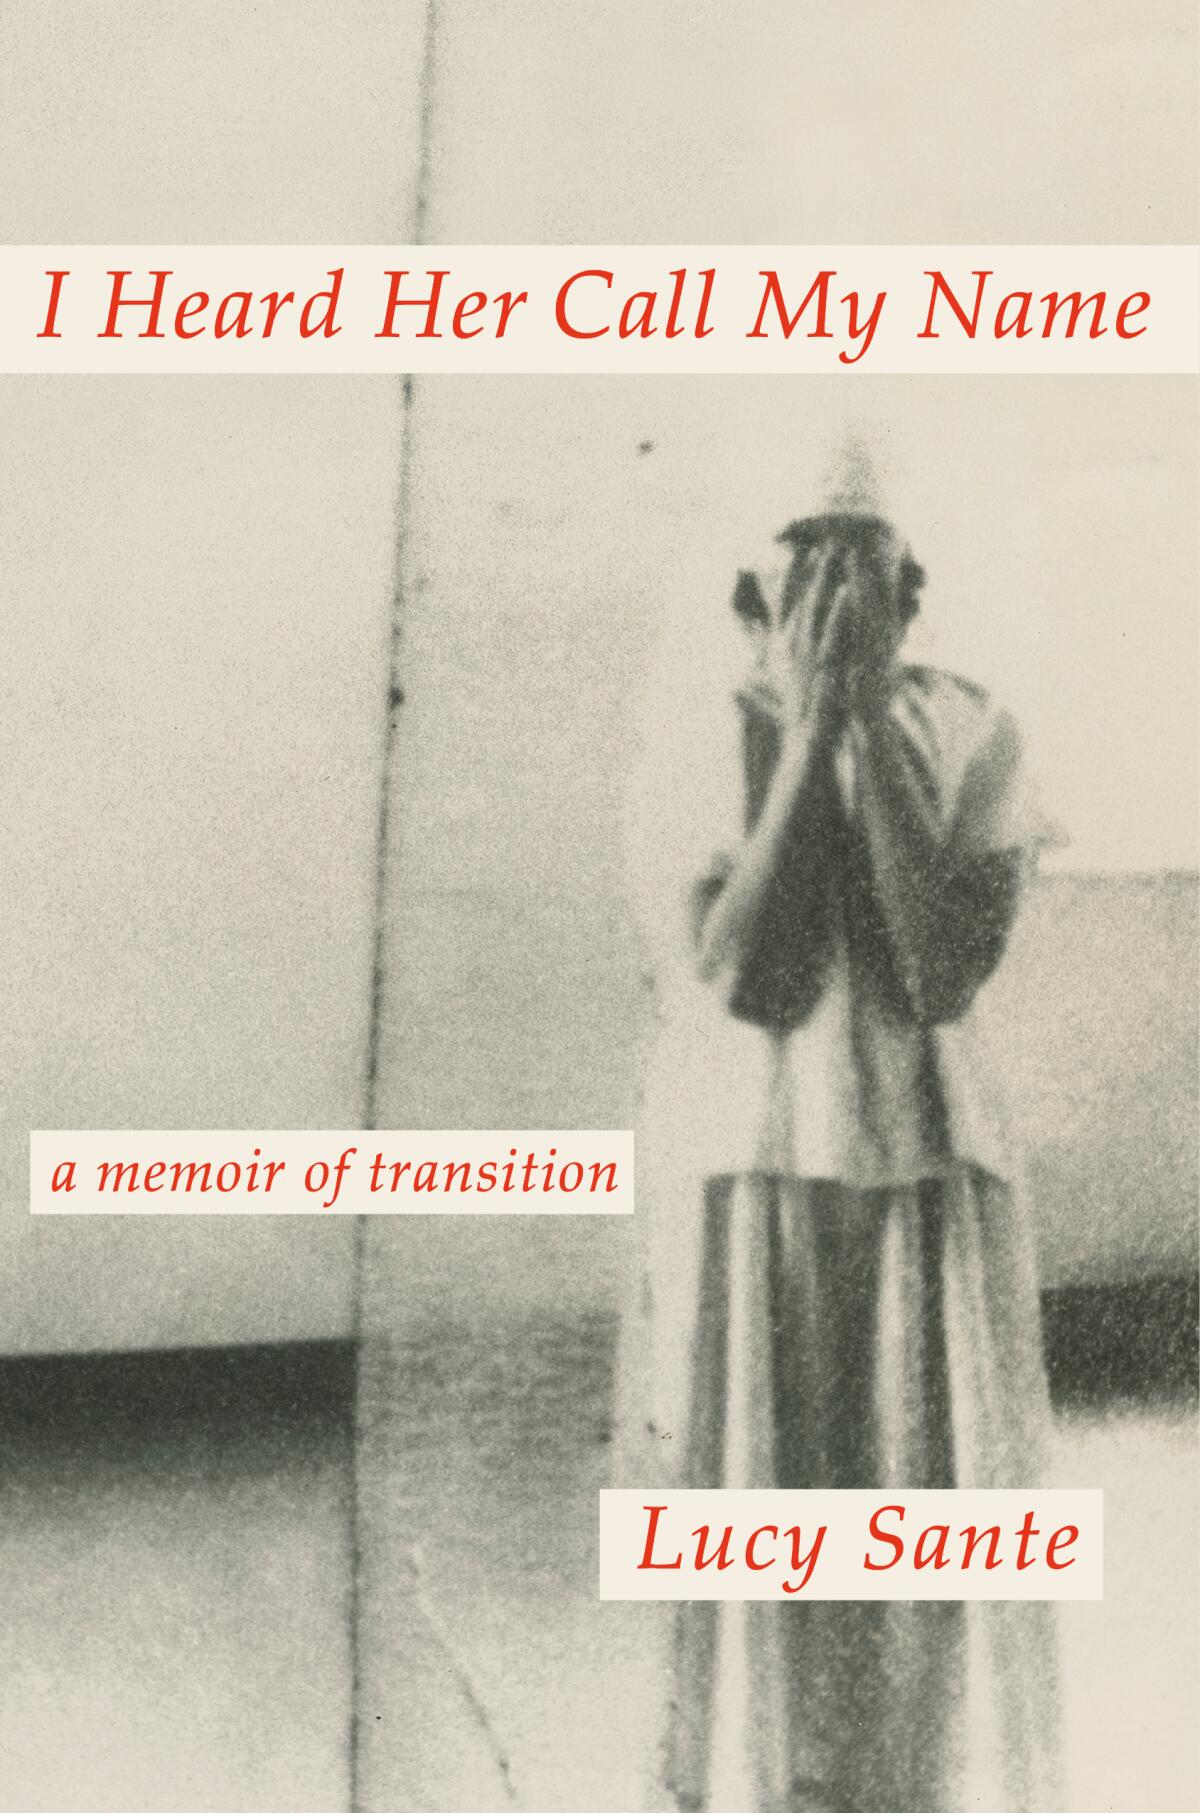 "I Heard Her Call My Name: A Memoir of Transition" by Lucy Sante